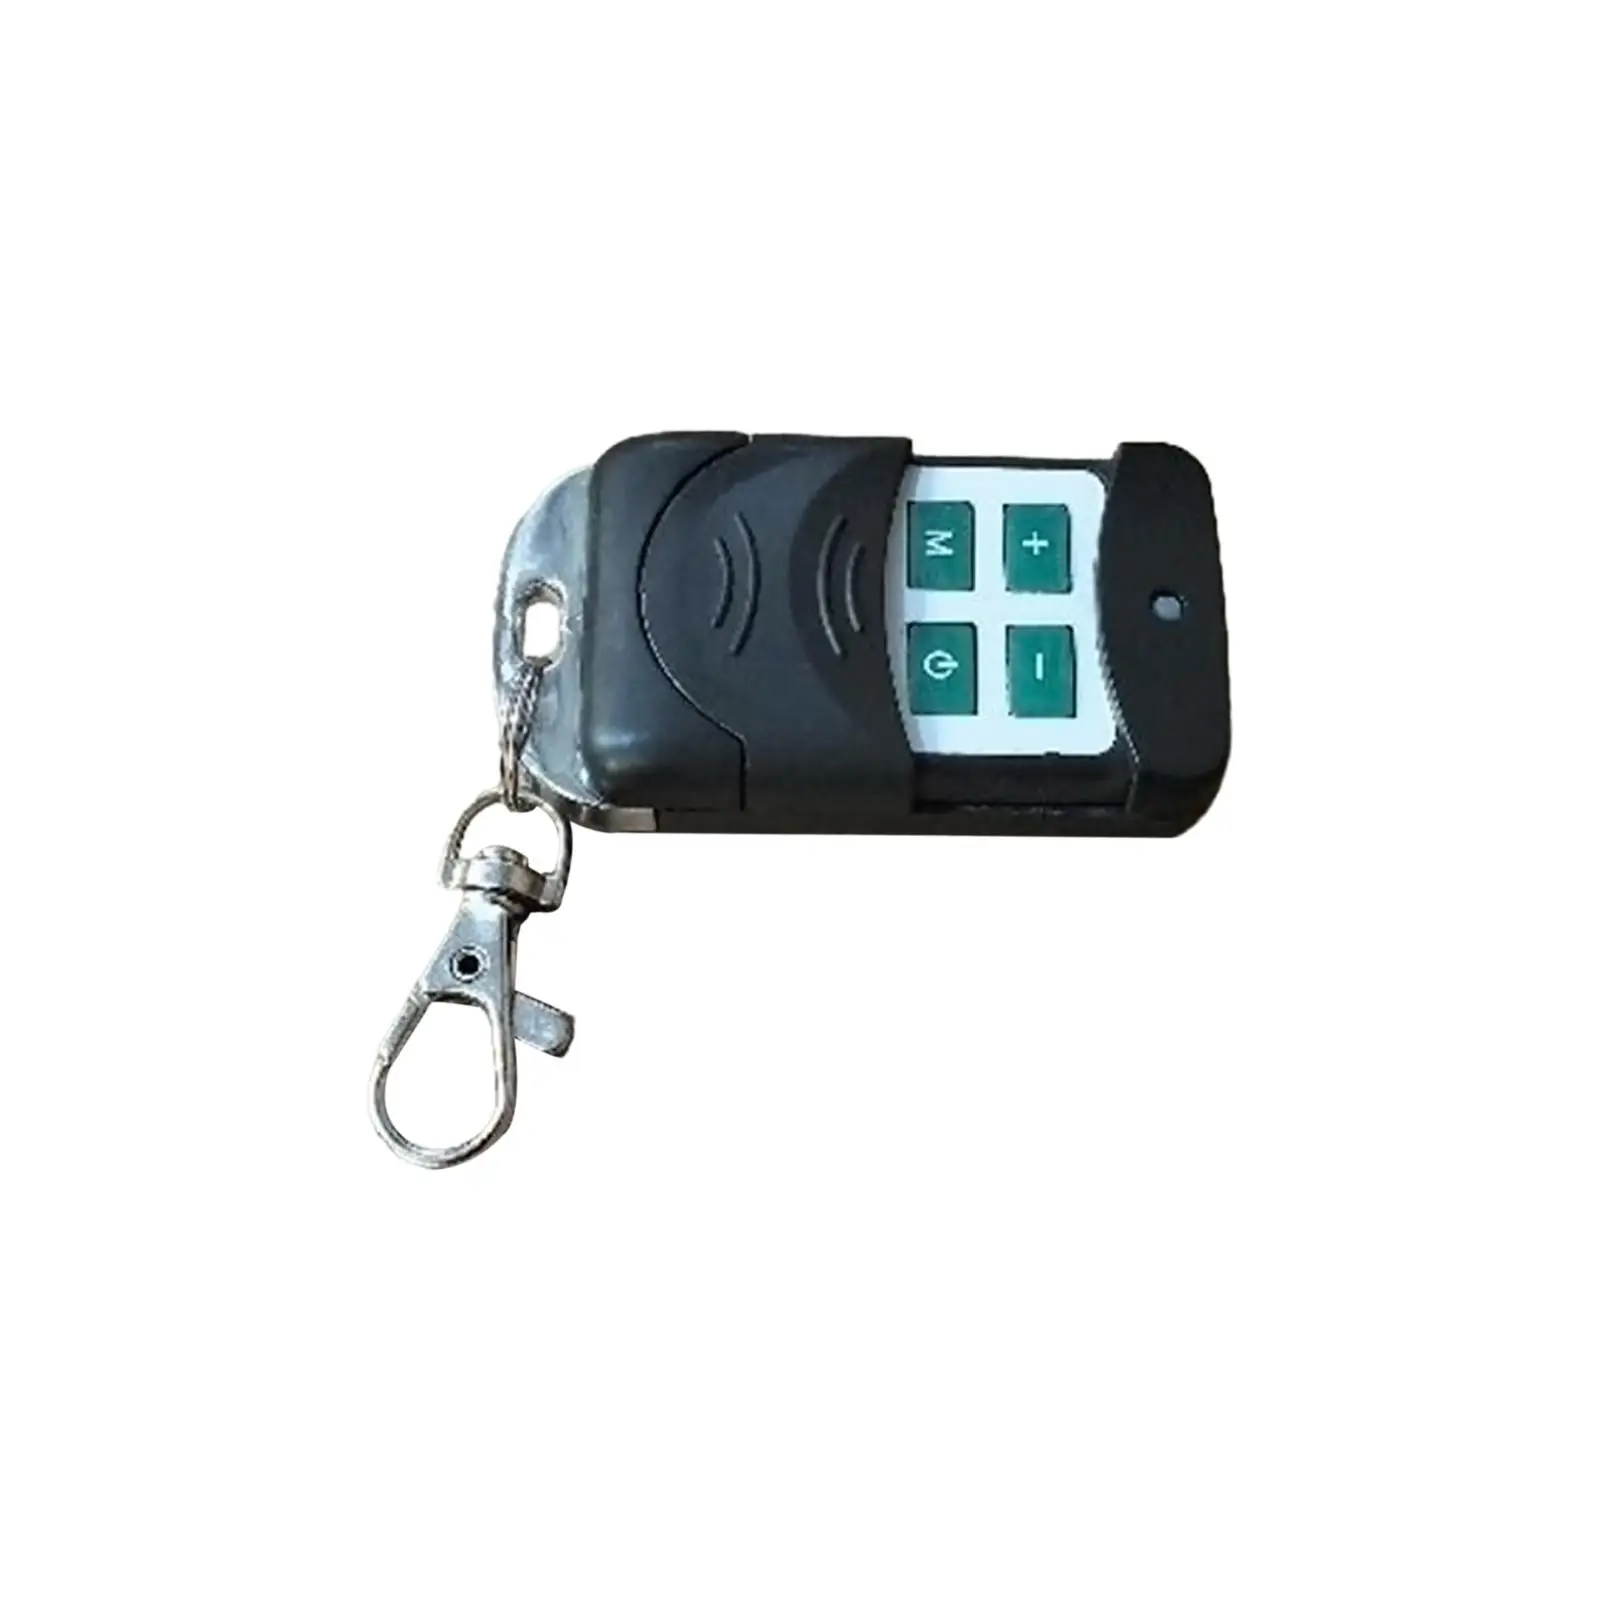 Car Parking Heater Remote Control for Heating Accessories Boat